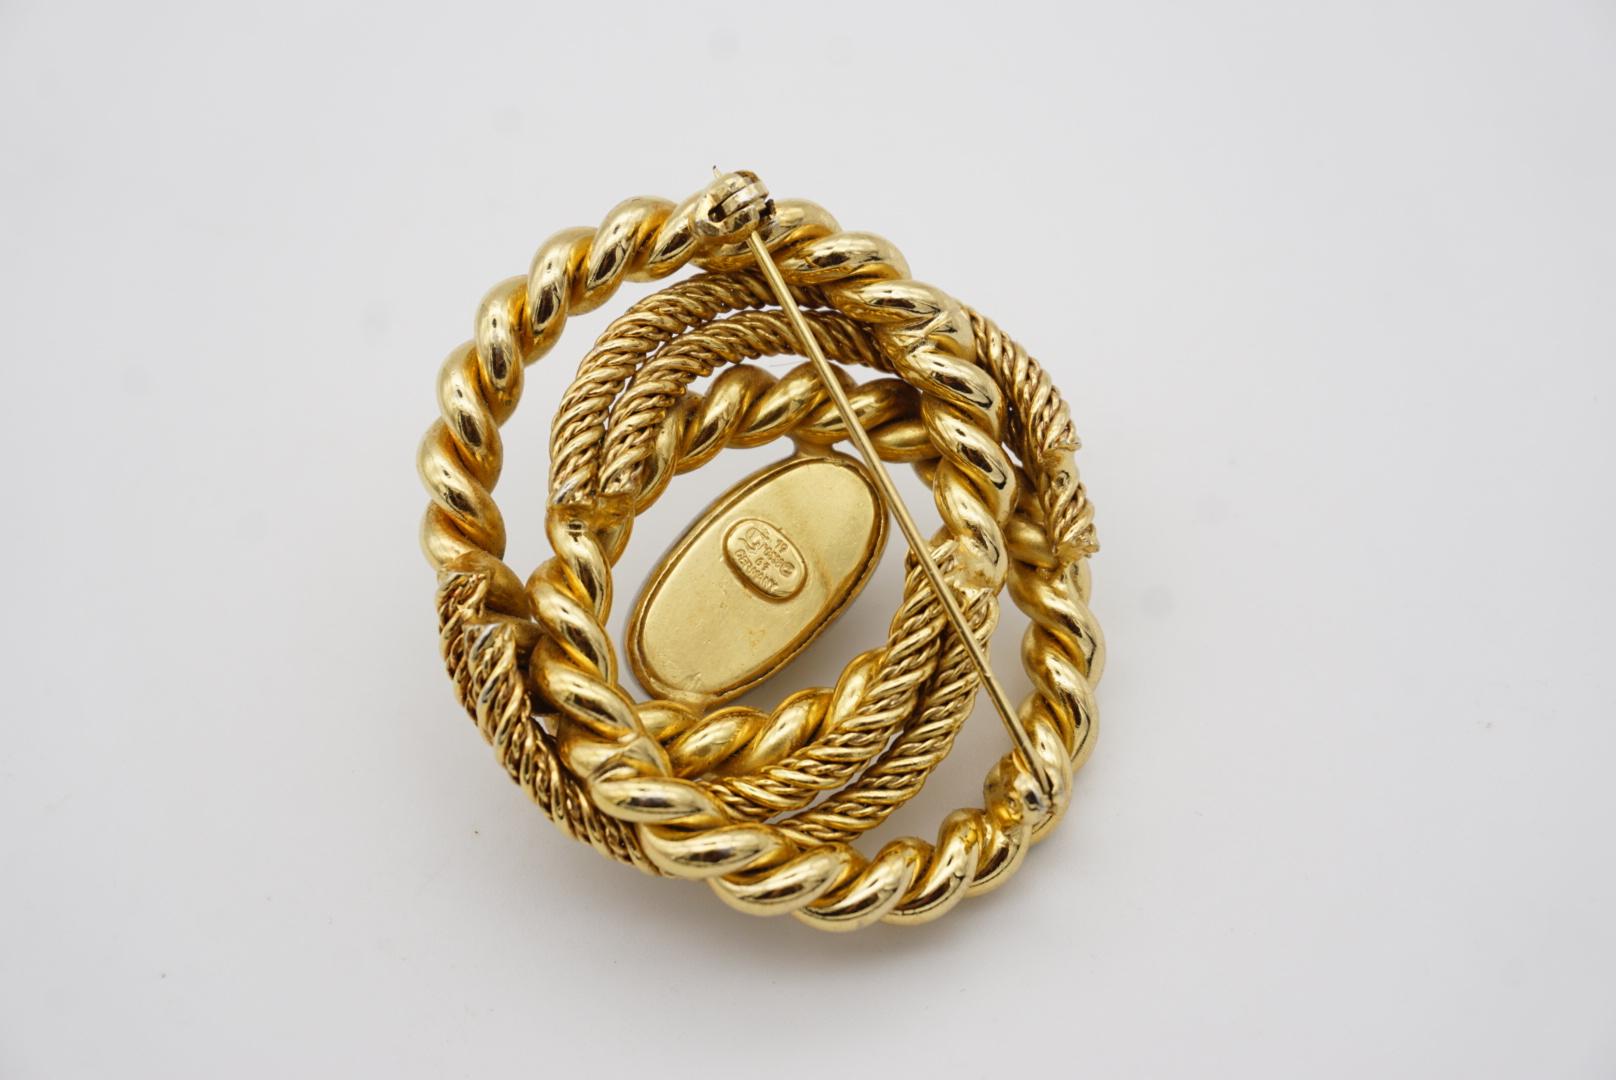 Christian Dior GROSSE 1969 Vintage Large Chunky Swirl Twist Gold Silver Brooch For Sale 5